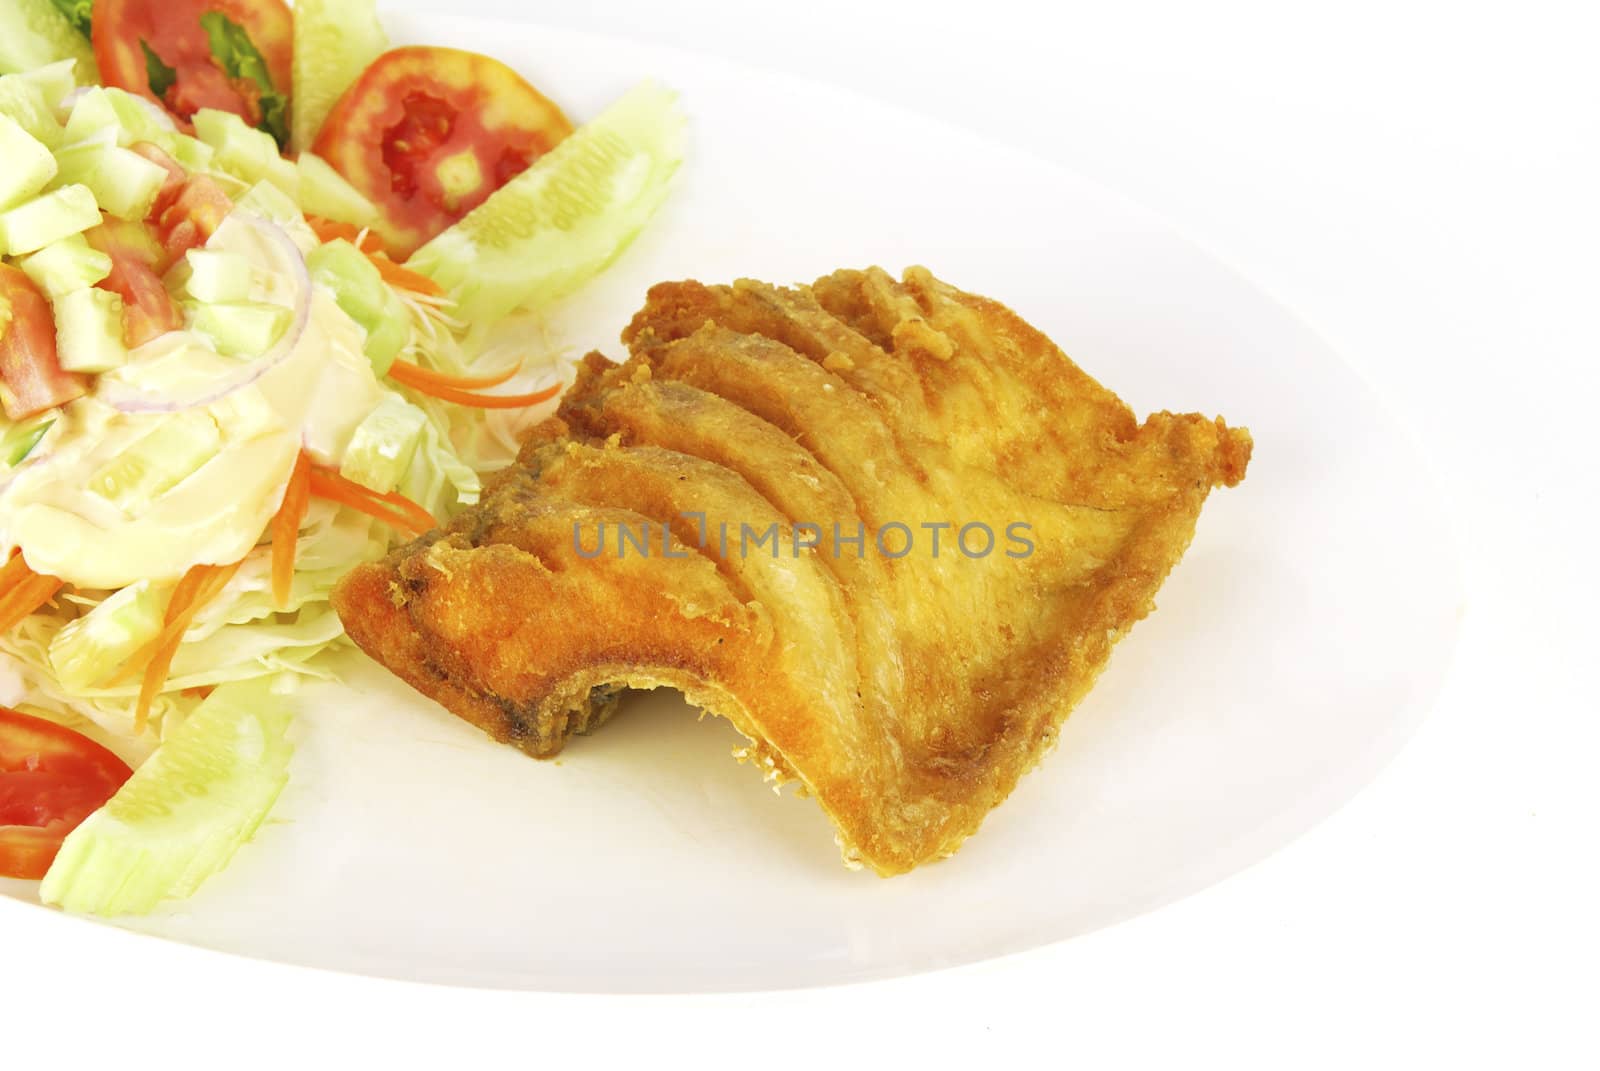 Fish dish - deep fried fish with vegetable salad on white